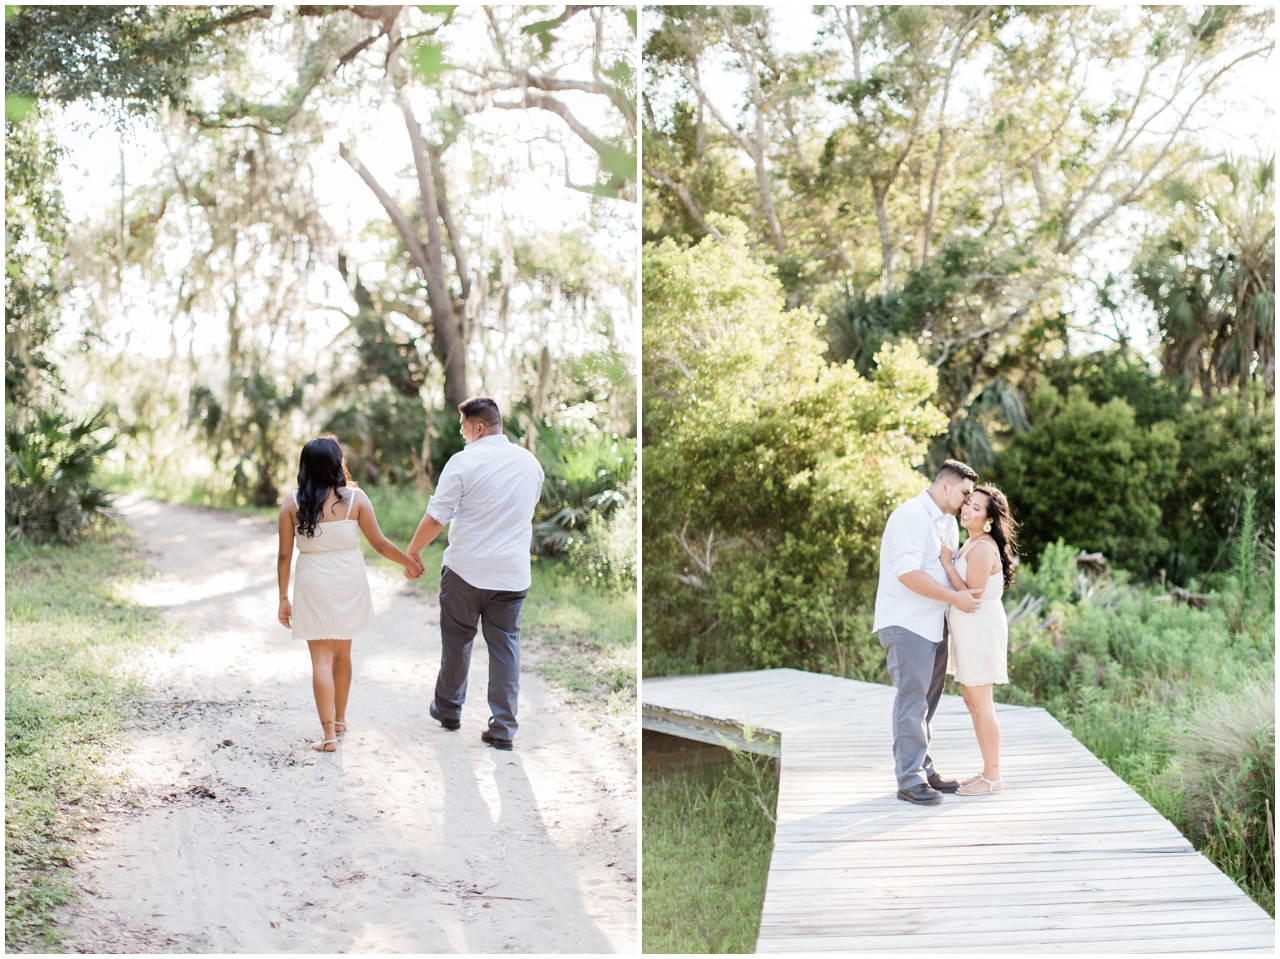 Jacksonville Wedding Photographer, Brooke Images, Thuy-Vi and Miguel's Engagement Session